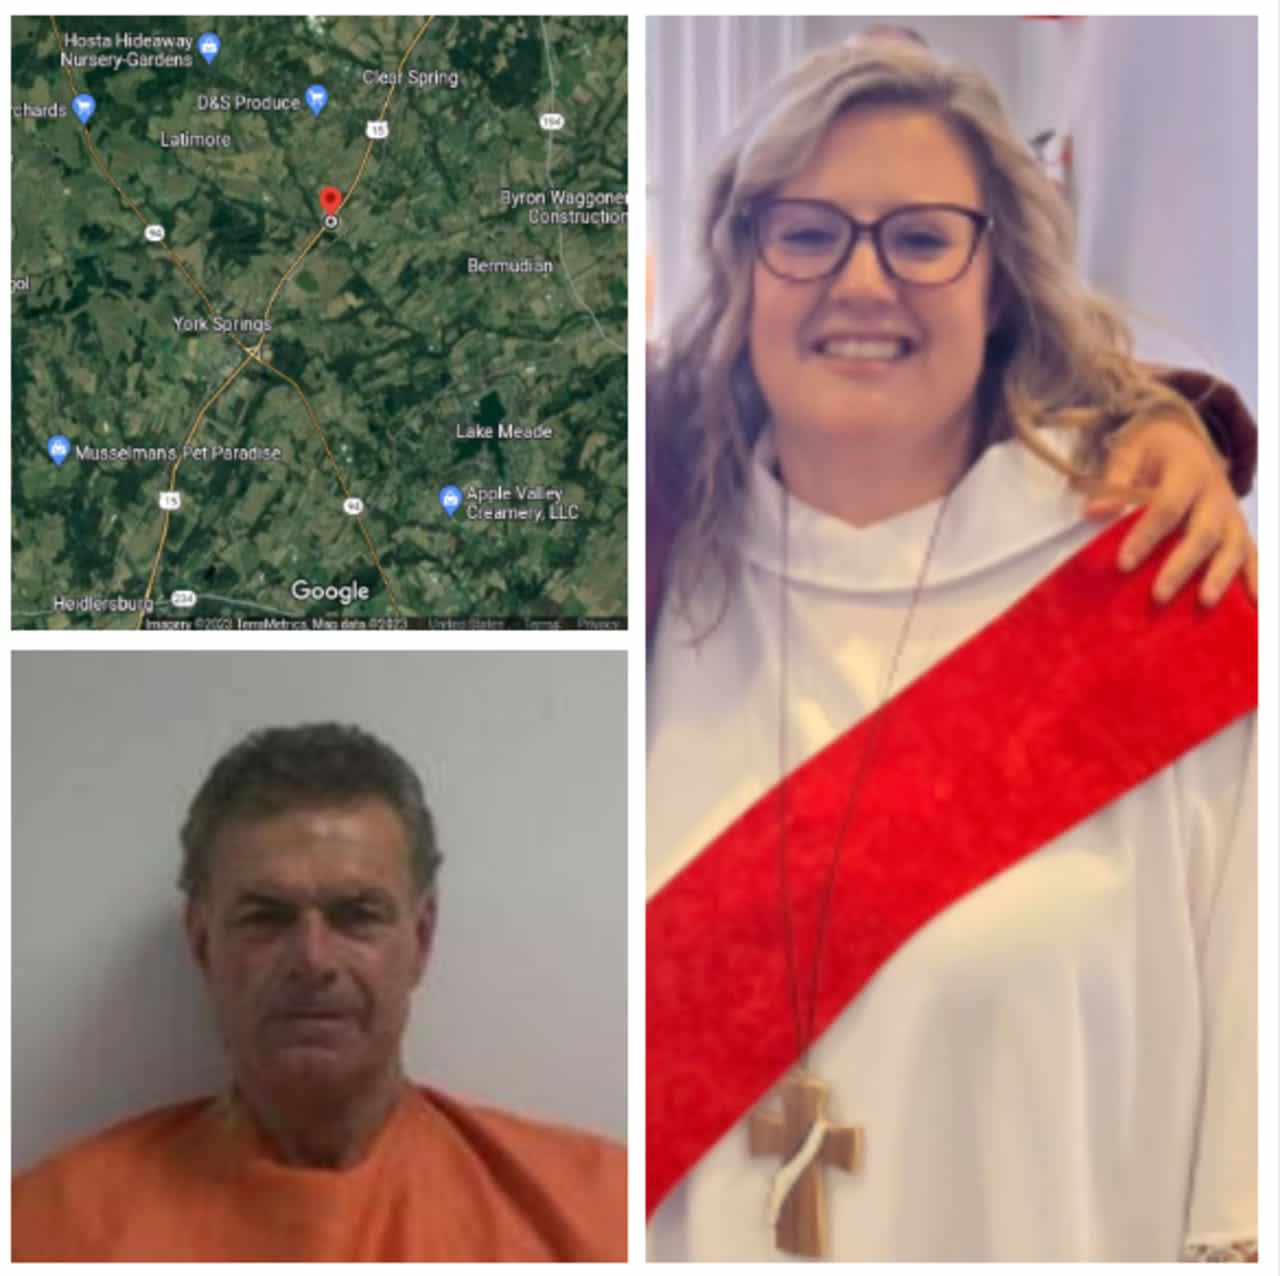 The map where the crash happened on Route 15 (upper left); the man who led police on a deadly chase, Ed Louis Willingham Jr. (bottom); and Decon Leanne Elliott (right).